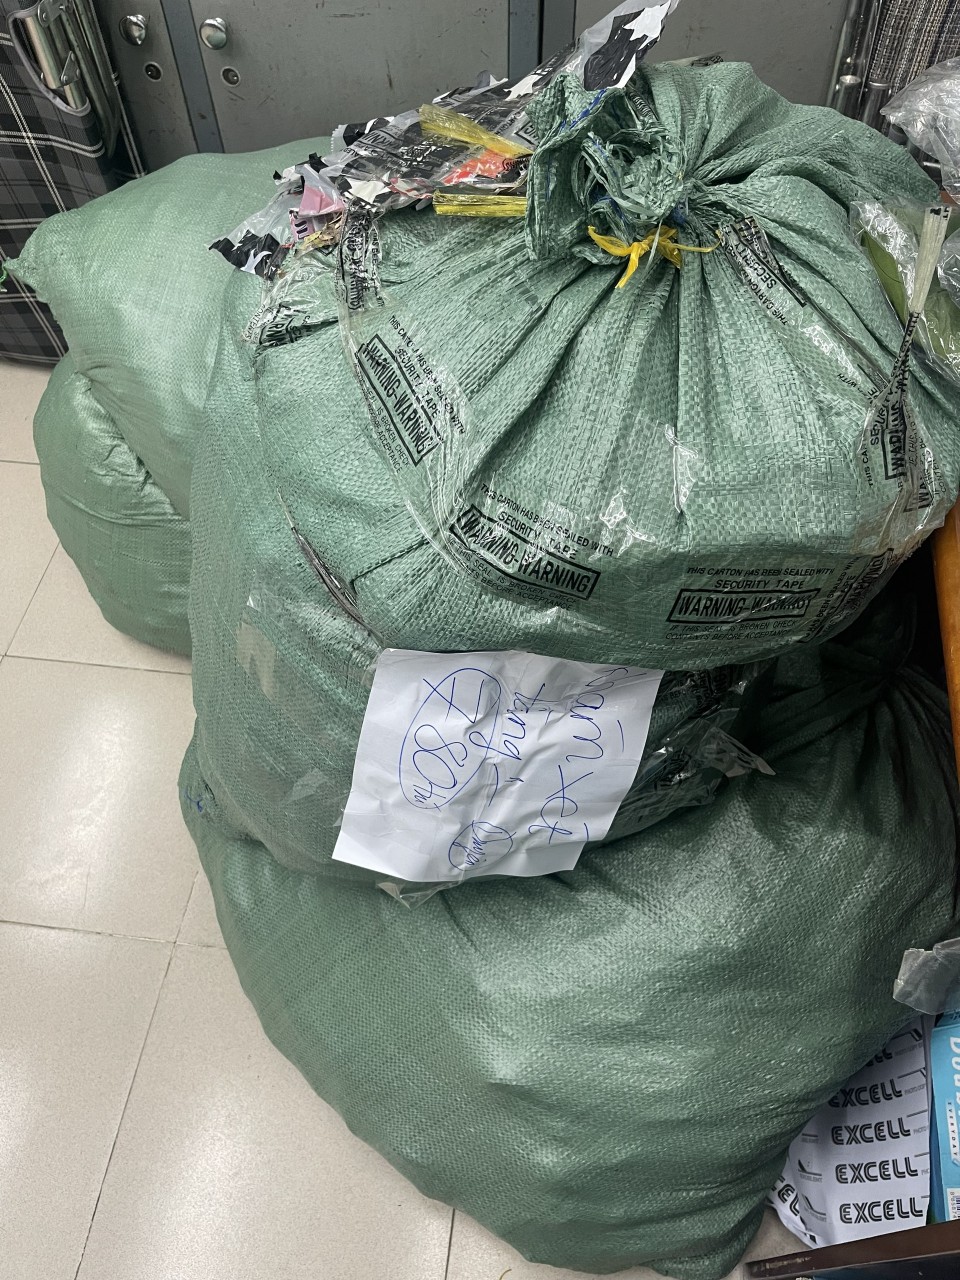 This supplied photo shows sacks of handbags stolen from a warehouse at Tan Son Nhat International Airport in Ho Chi Minh City.